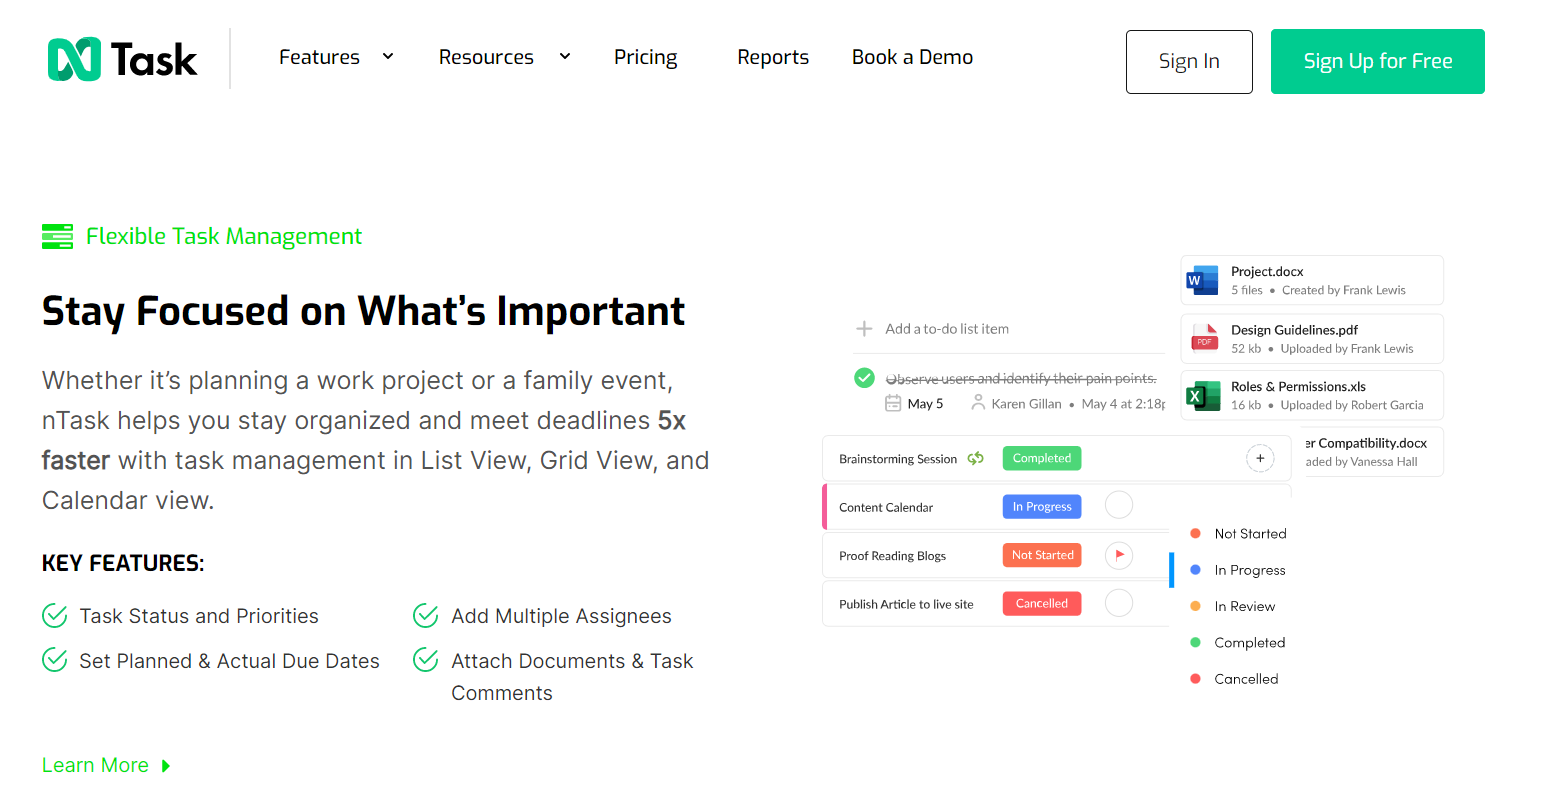 nTask homepage, with key features and flexible task management between team members